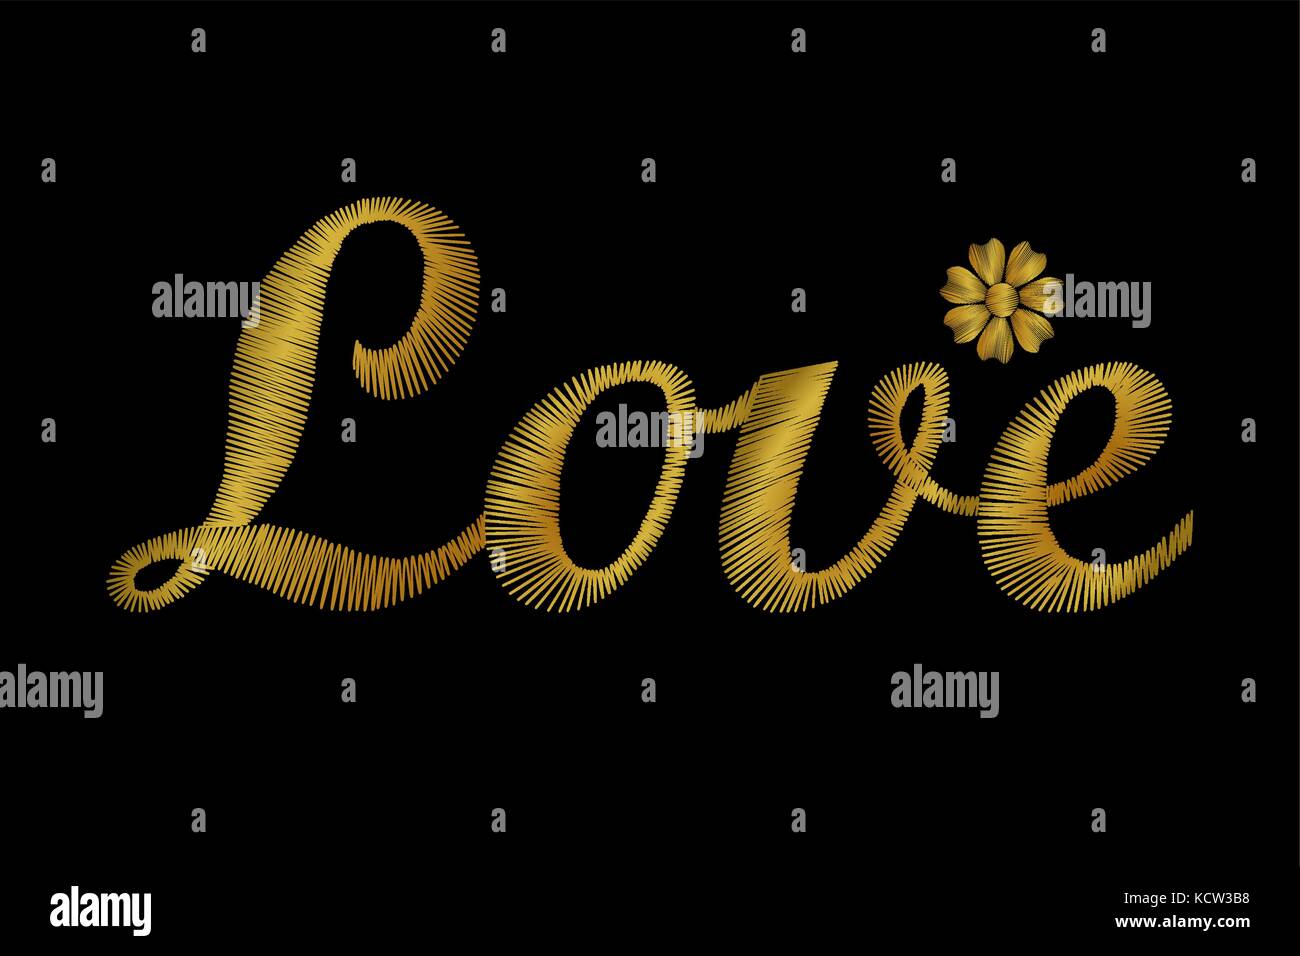 Embroidery lettering word Love. Golden stiches field daisy vector illustration vintage retro style Valentine Day Stock Vector